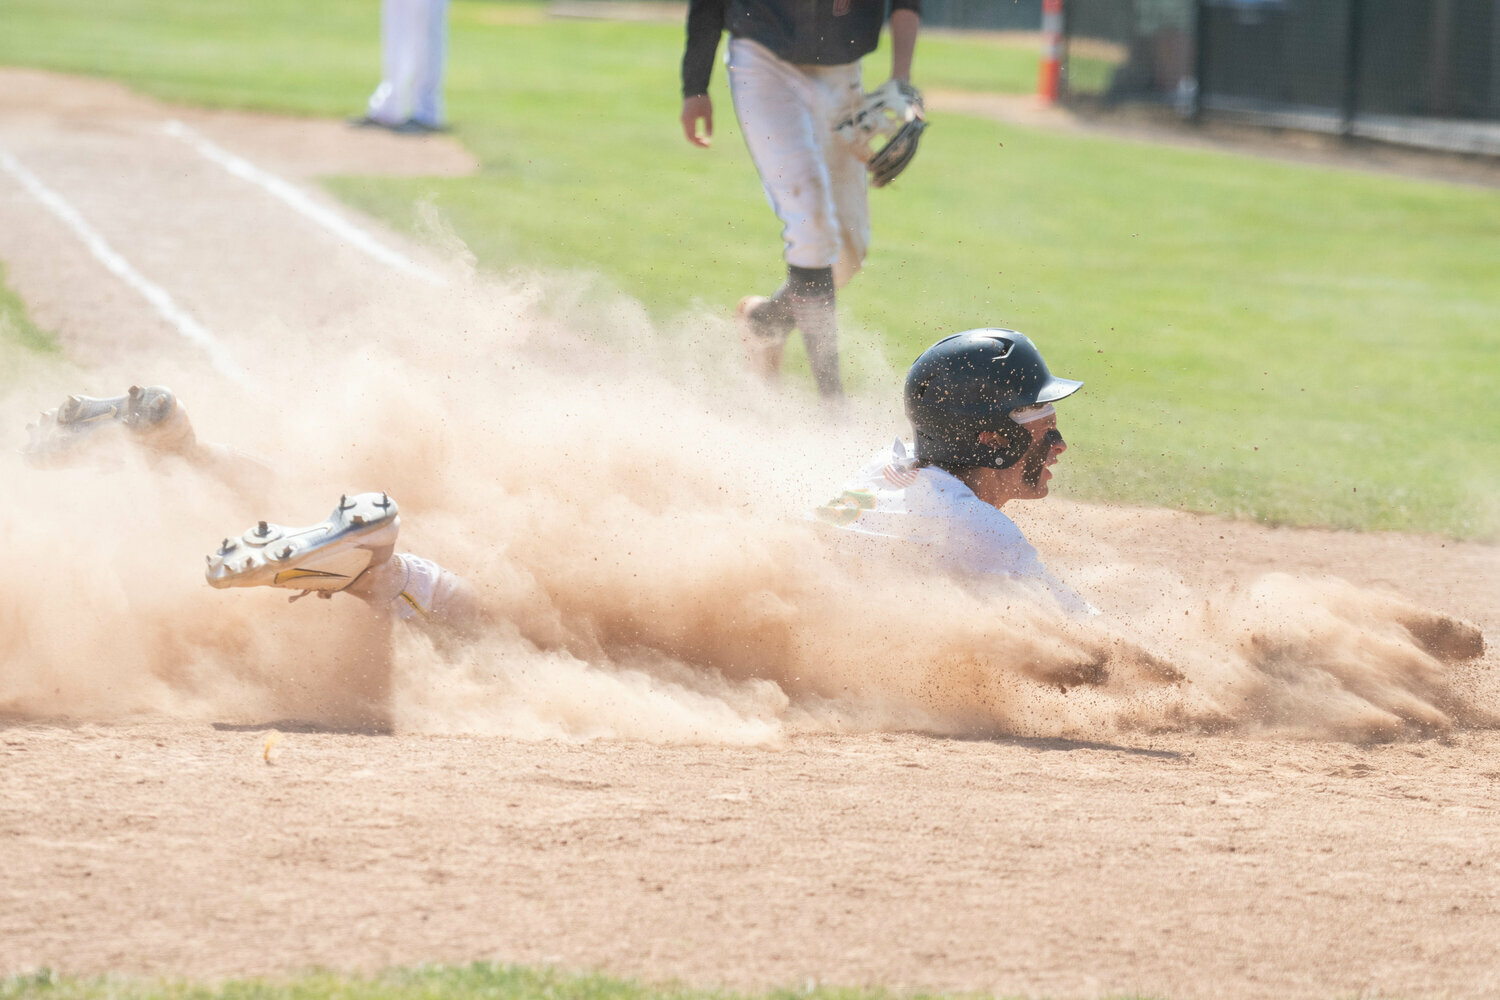 Eddie Marson dives home to score a run during Tumwater's 8-2 win over Grandview in the first round of the 2A state tournament, May 20 at Wheeler Field in Centralia.